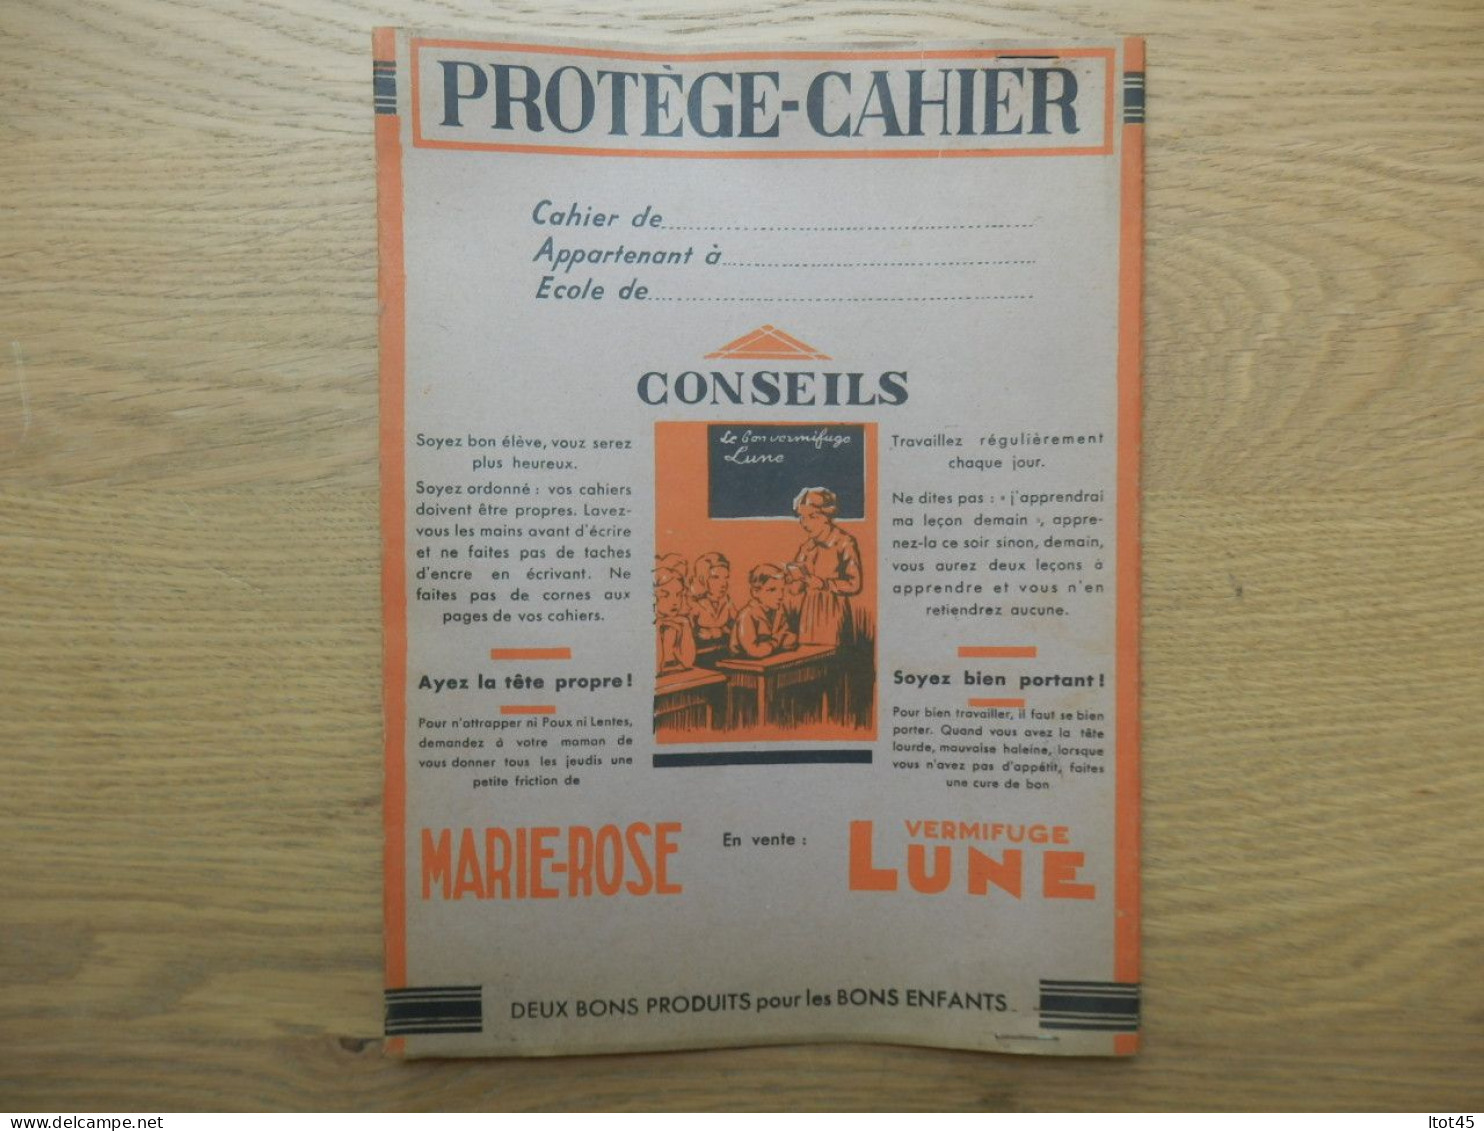 PROTEGE-CAHIER MARIE-ROSE VERMIFUGE LUNE - Protège-cahiers